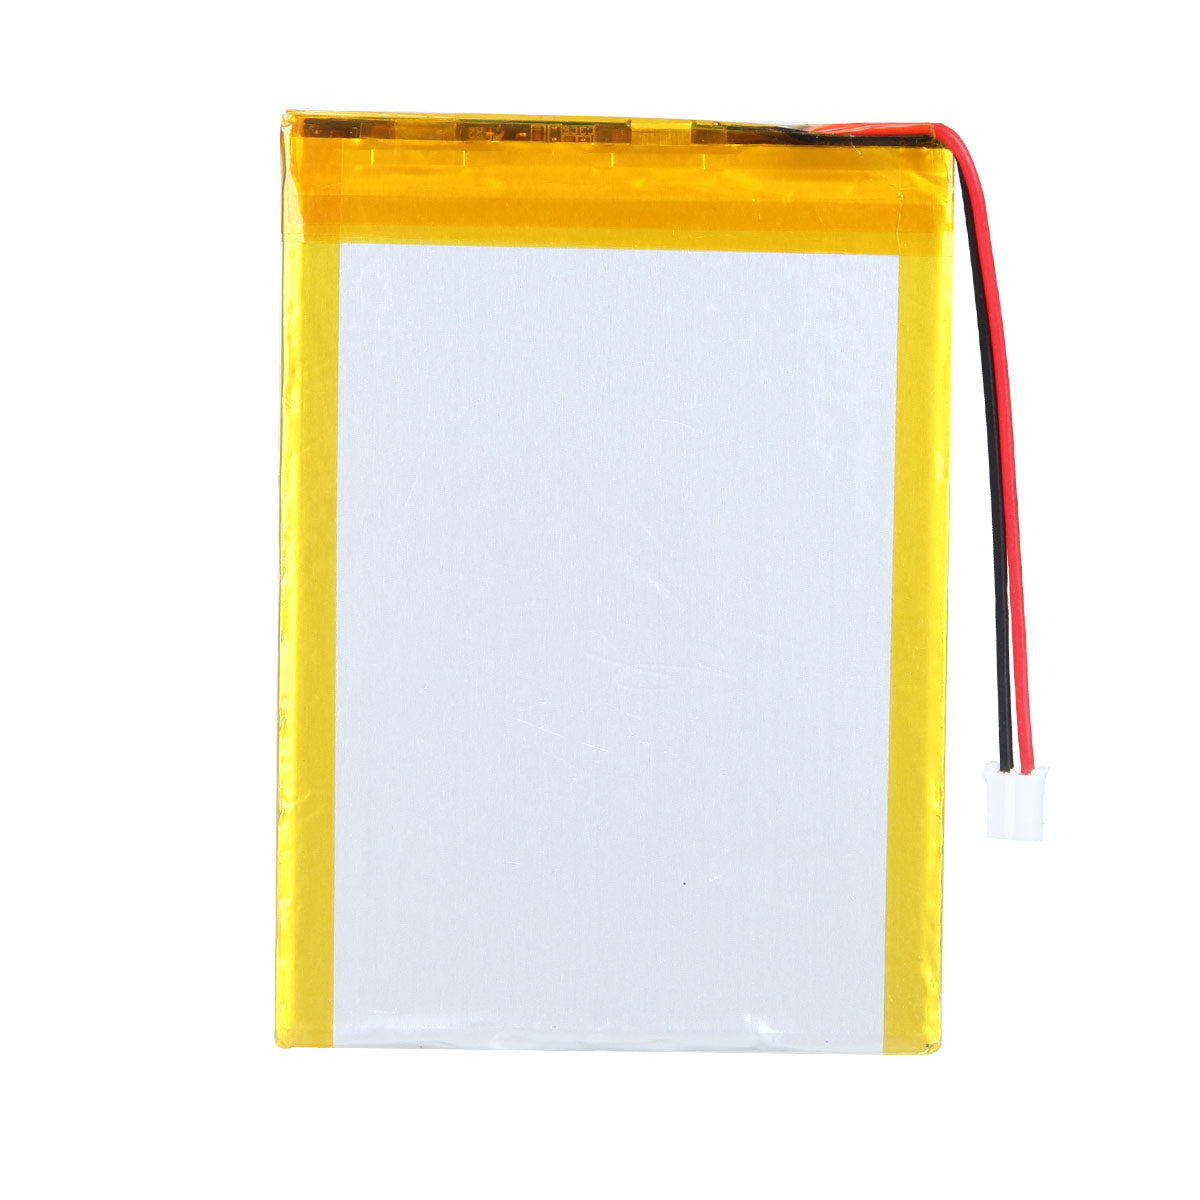 YDL 3.7V 2500mAh 375678 Rechargeable Lithium Polymer Battery Length 80mm